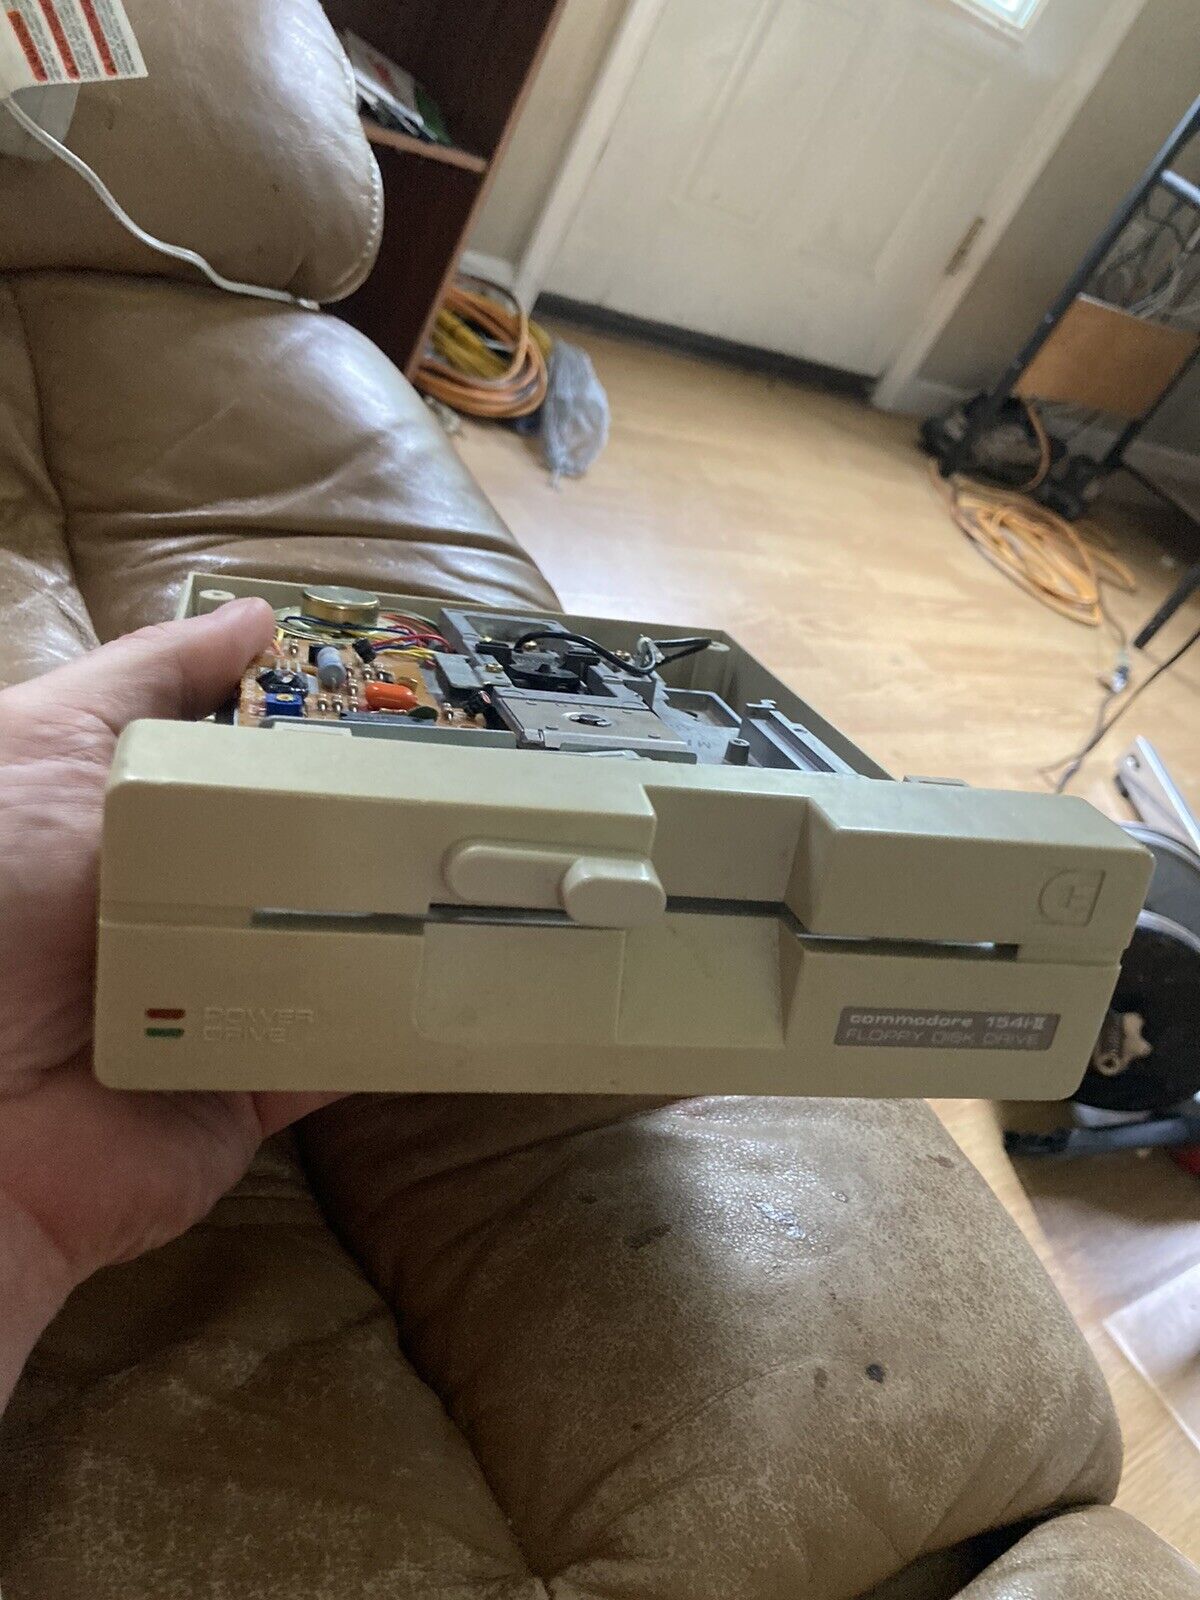 commodore 1541 ii for parts please read part’s only